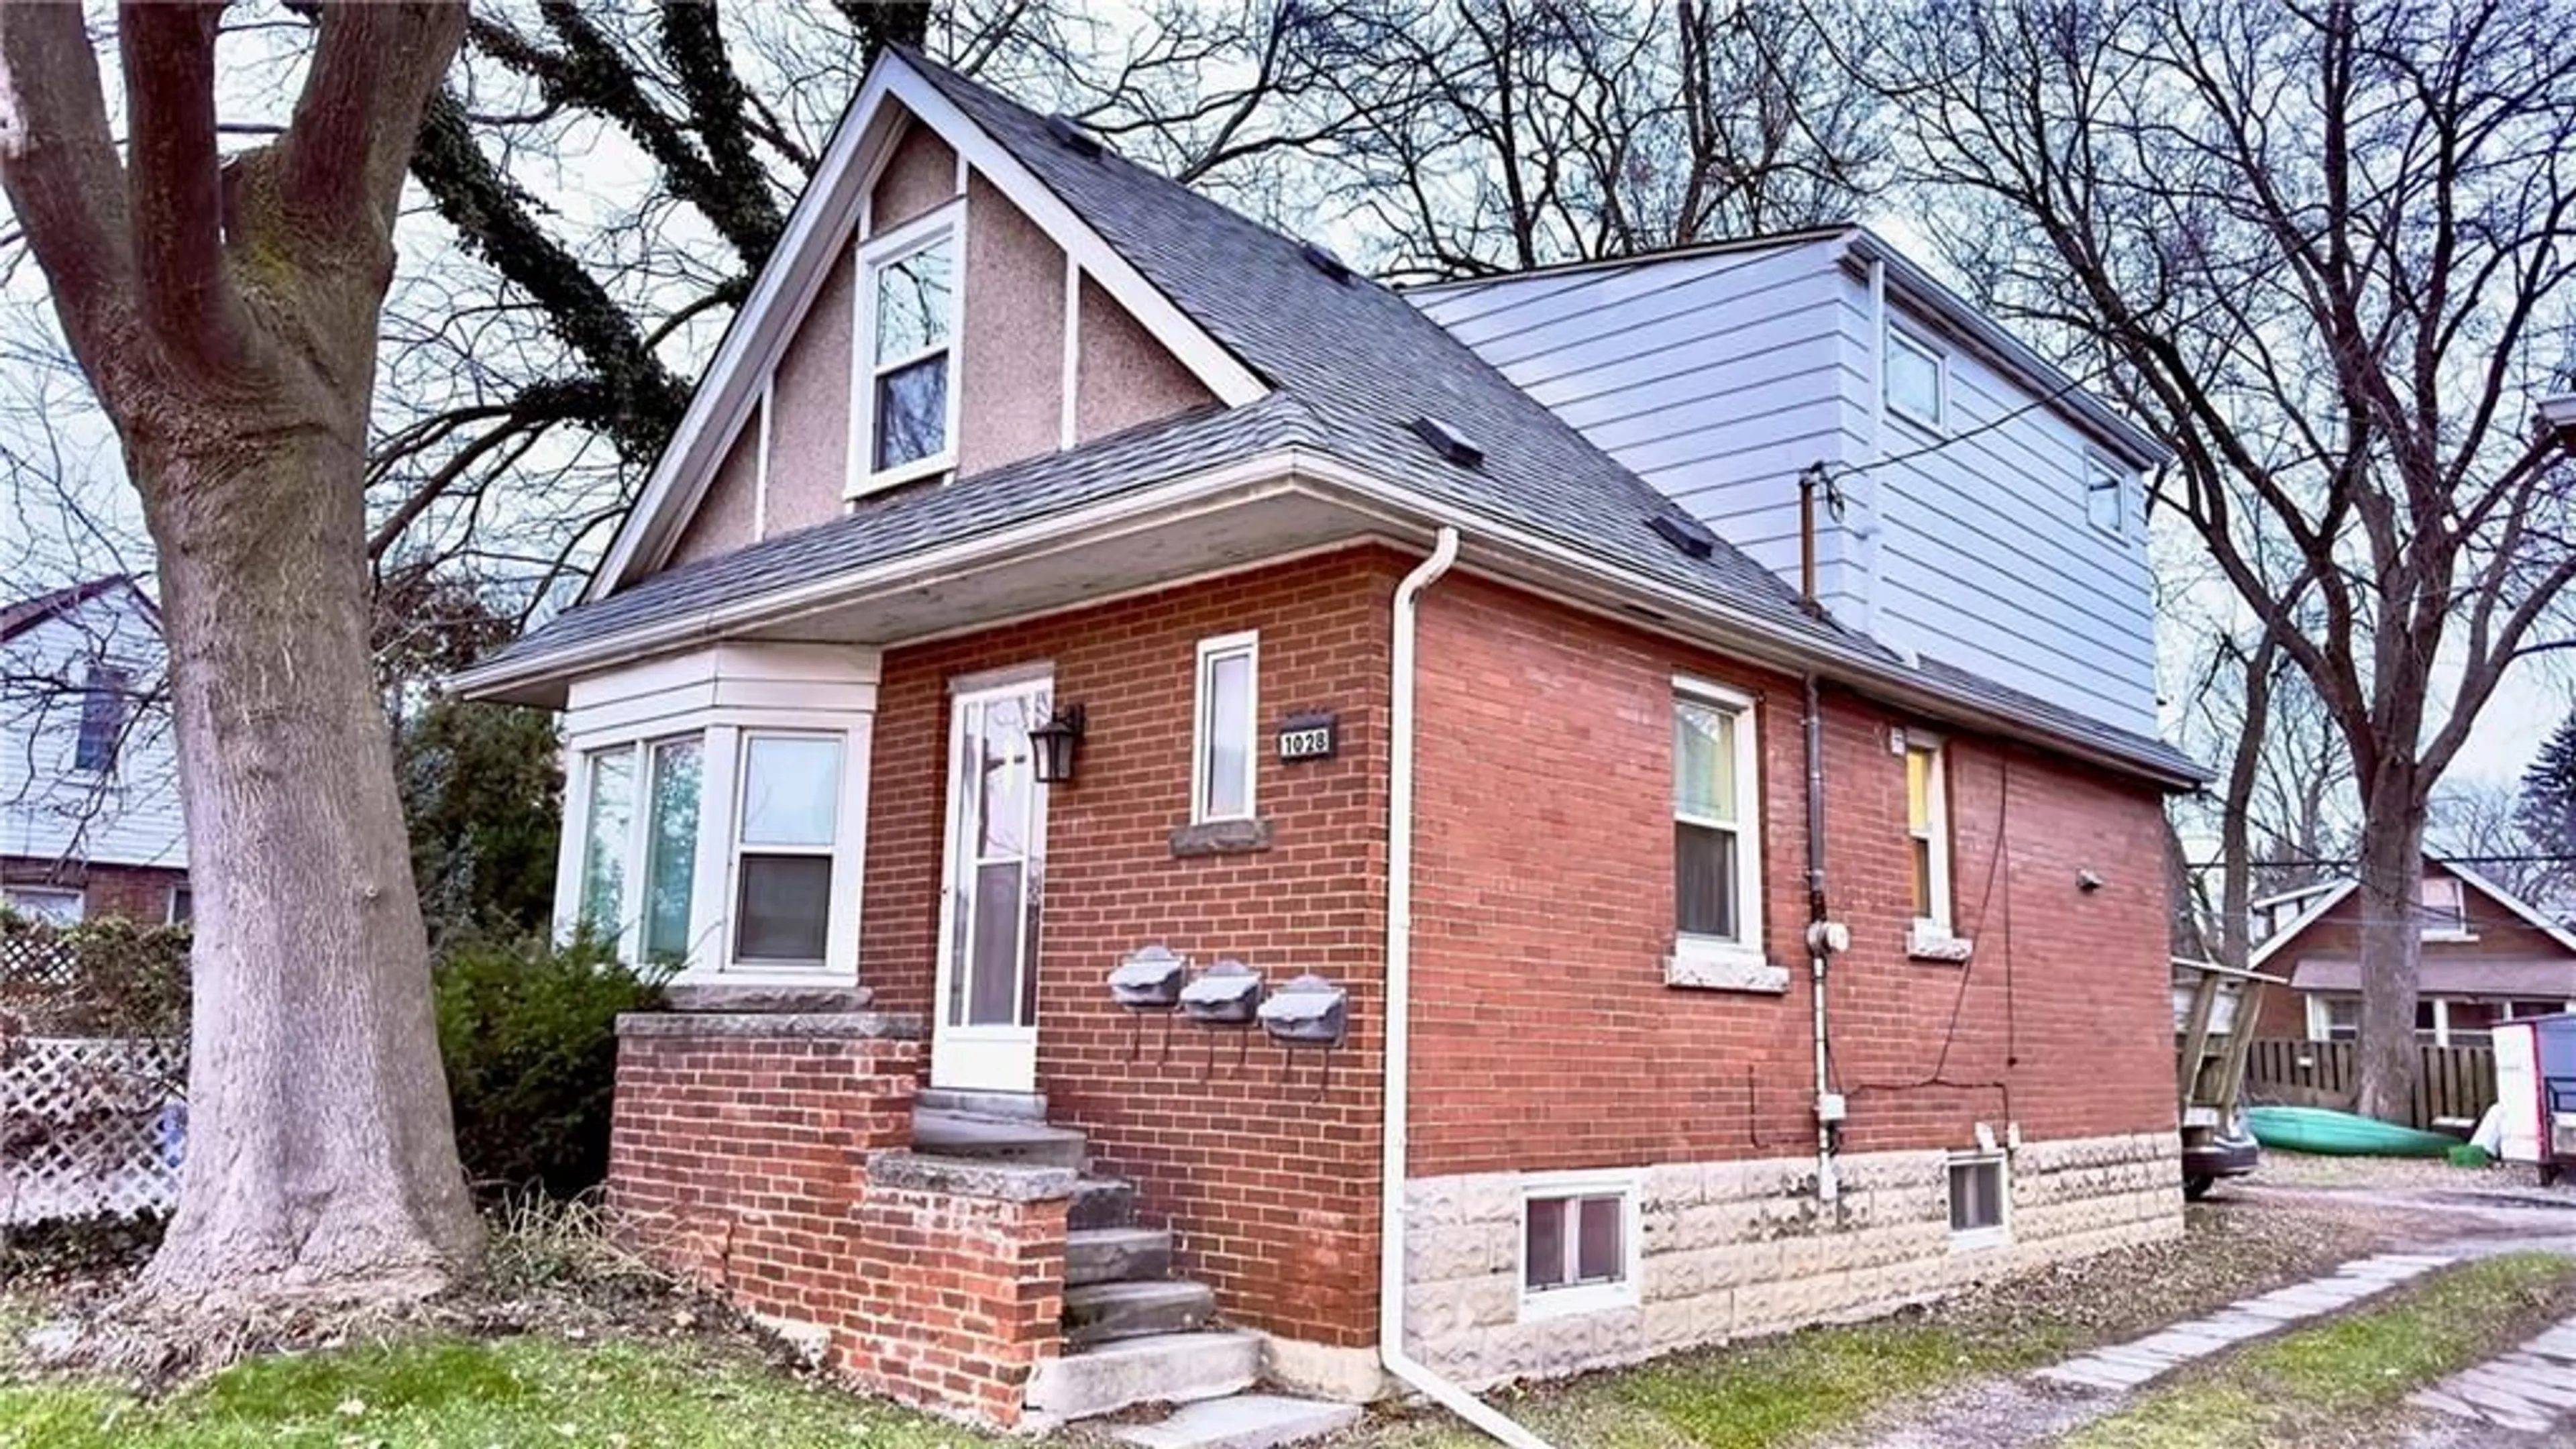 Home with brick exterior material for 1028 Main St, Hamilton Ontario L8S 1B2